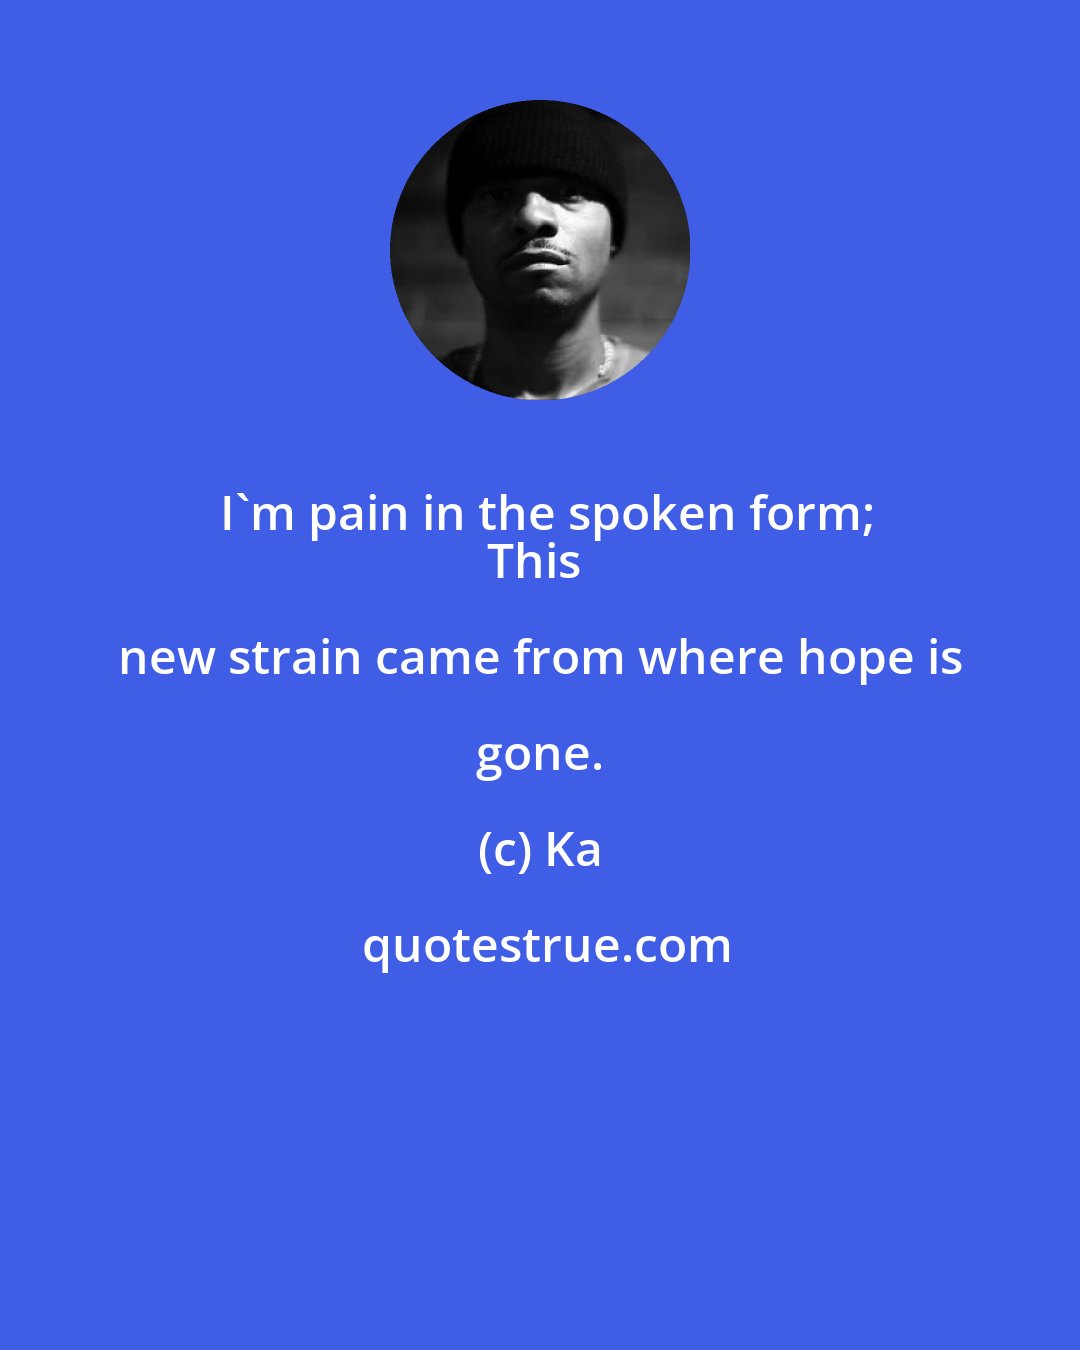 Ka: I'm pain in the spoken form;
This new strain came from where hope is gone.